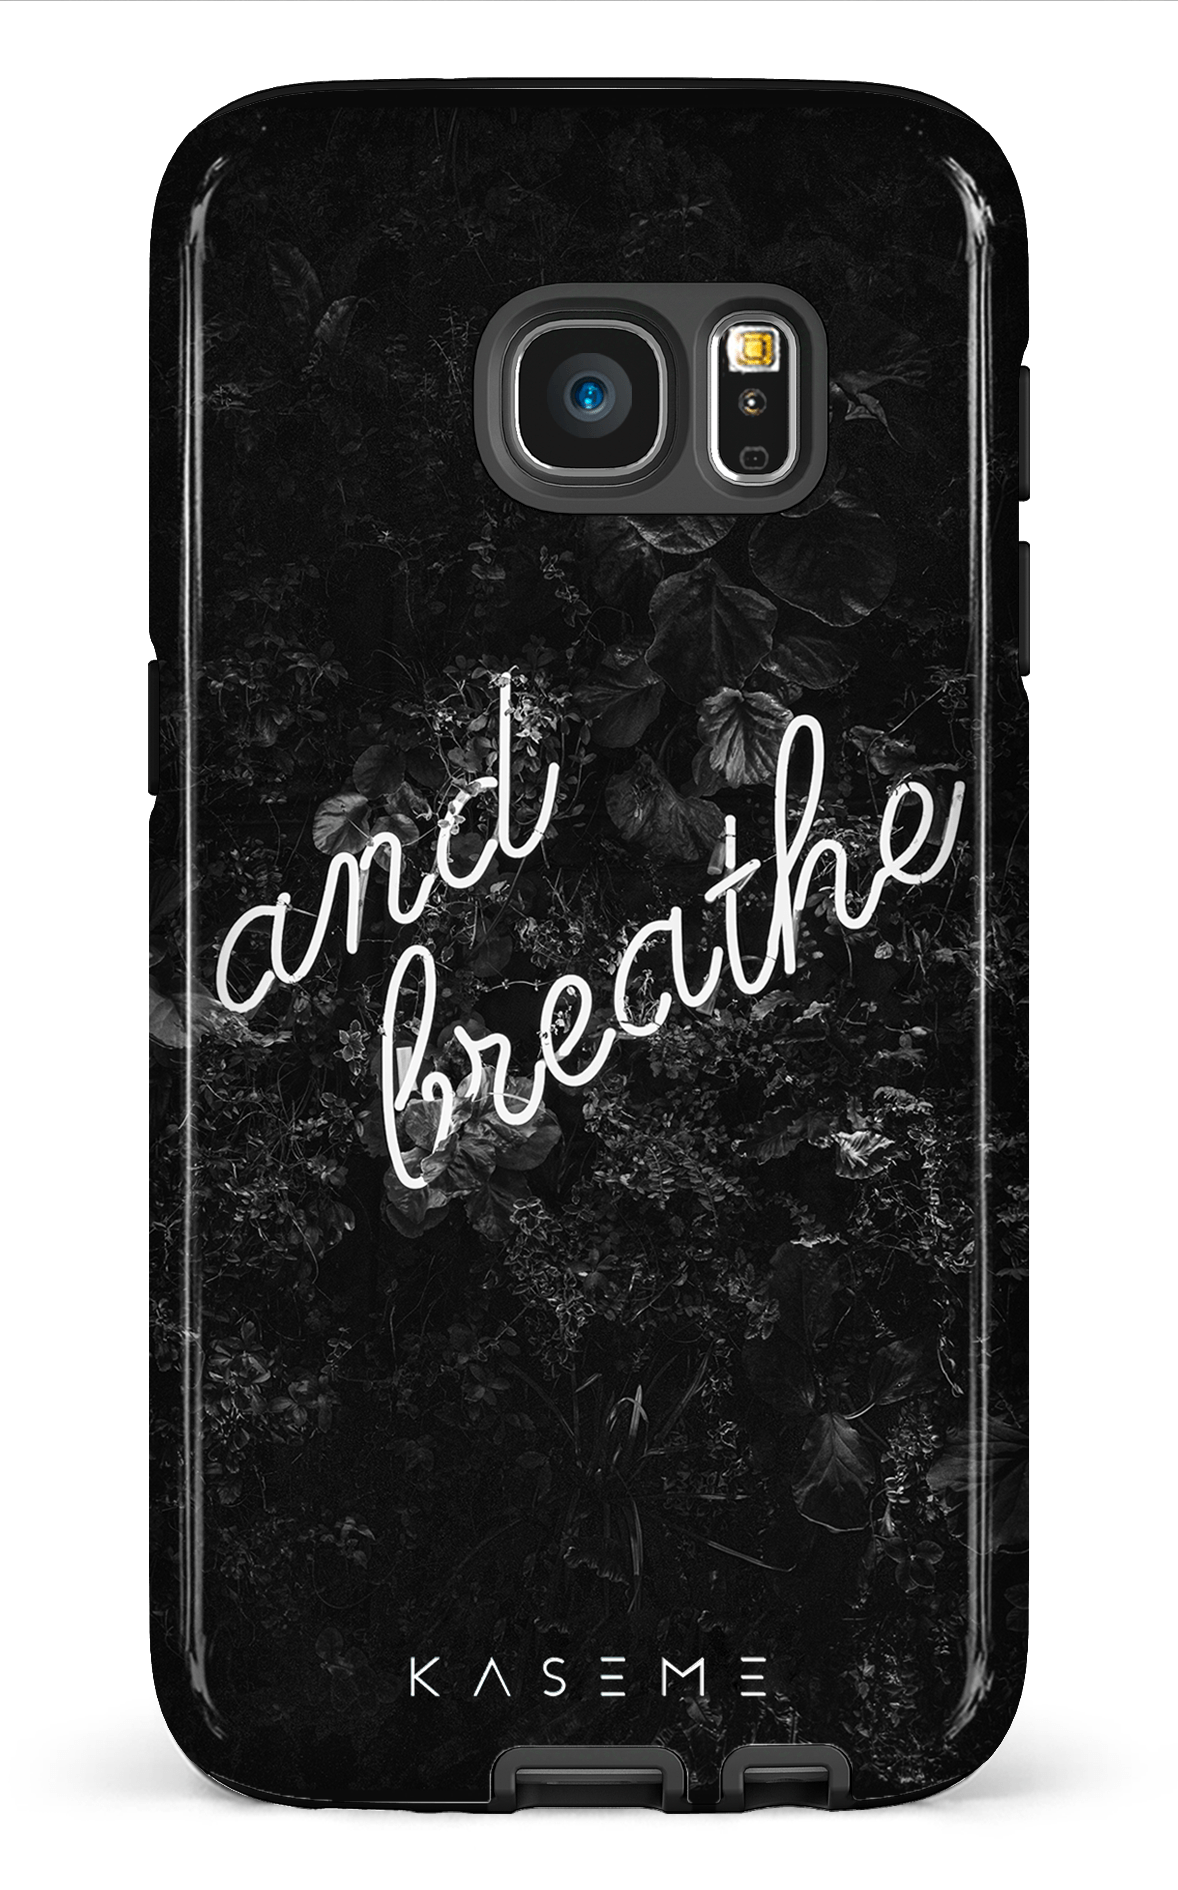 Exhale - Galaxy S7